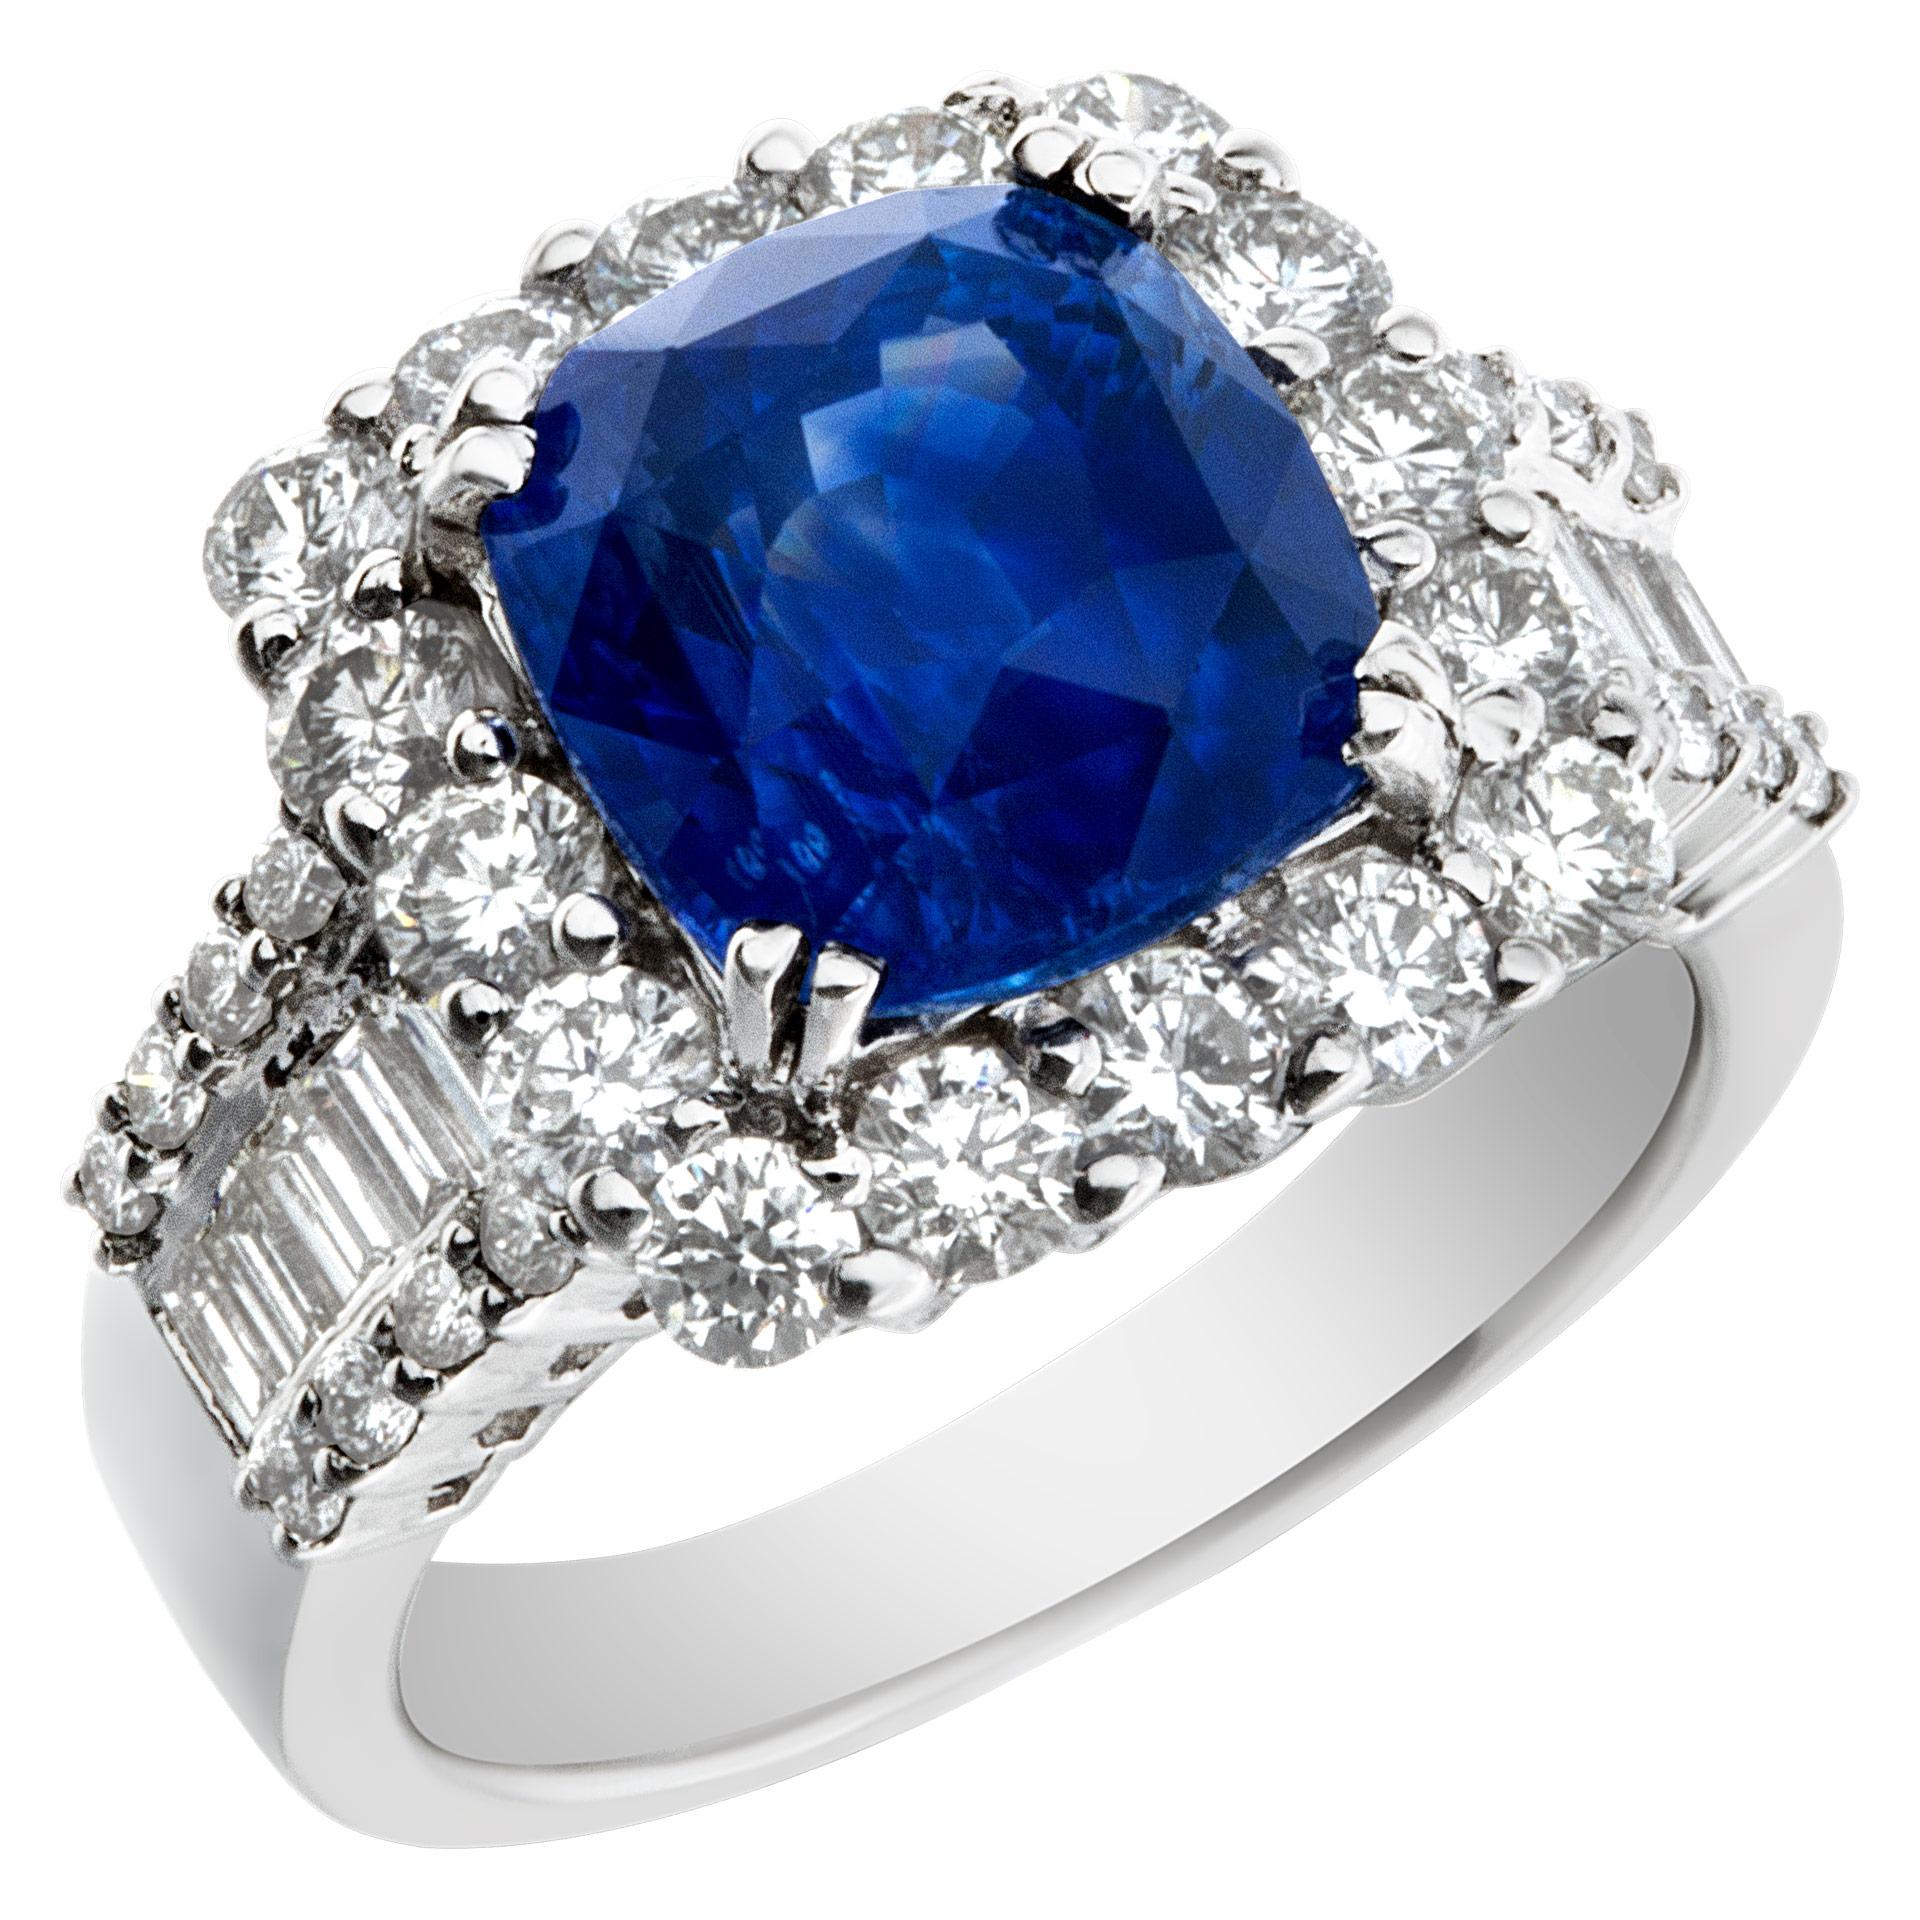 GIA certified stunning 5.73 carat heated blue sapphire ring with 1.90 carats in G-H color, VS-SI clarity diamond accents in 18k white gold. Size 6.5.This GIA certified ring is currently size 6.5 and some items can be sized up or down, please ask! It